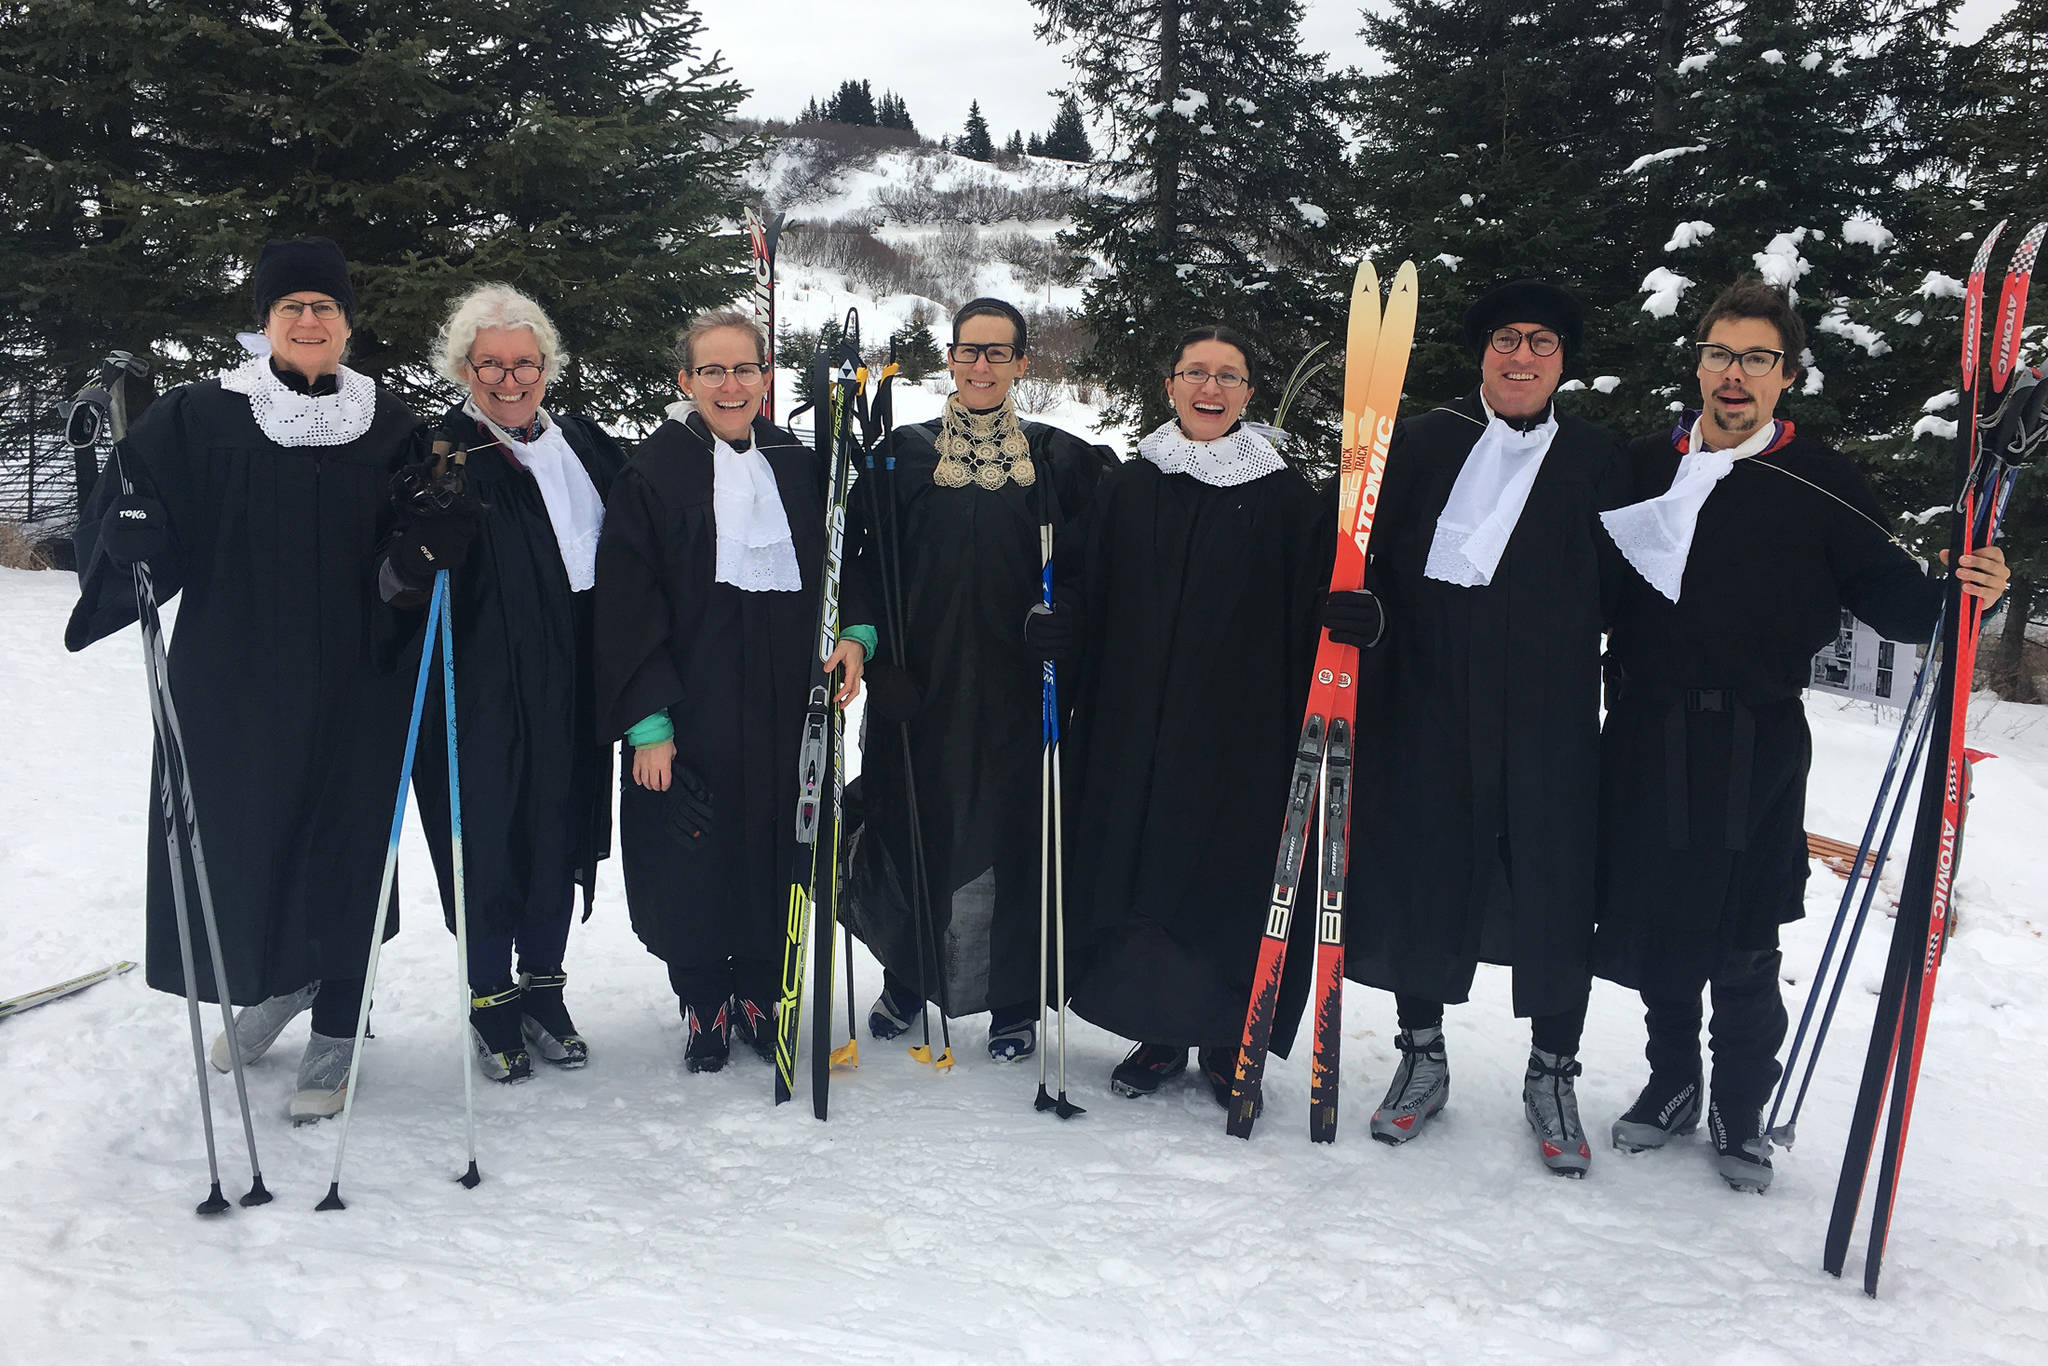 A gaggle of Ruth Bader Ginsburgs pose to show off their group costume before the annual Ski for Women on Sunday, Feb. 3, 2019 at the Lookout Mountain Trails near Homer, Alaska. (Photo by Megan Pacer/Homer News)